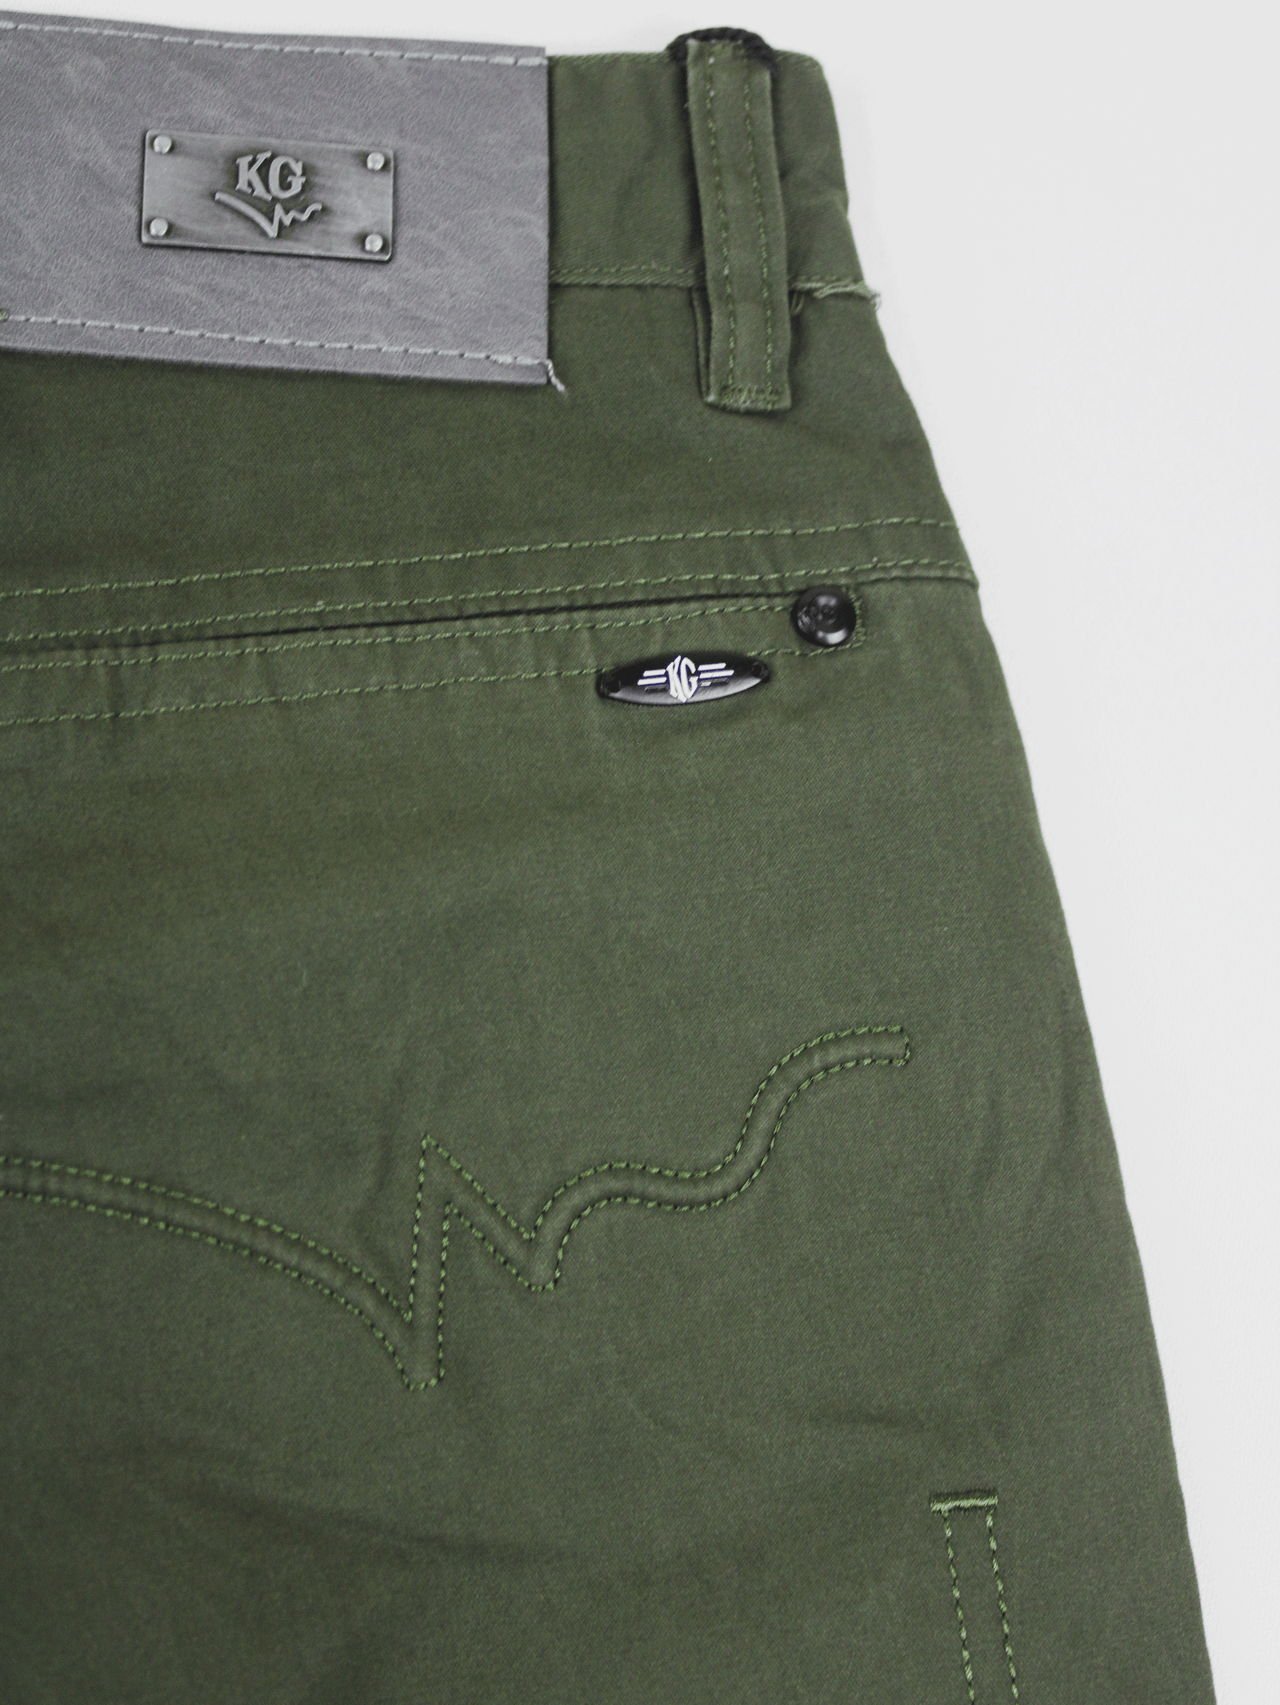 KG DARK OLIVE CLASSIC FIT CHINOS